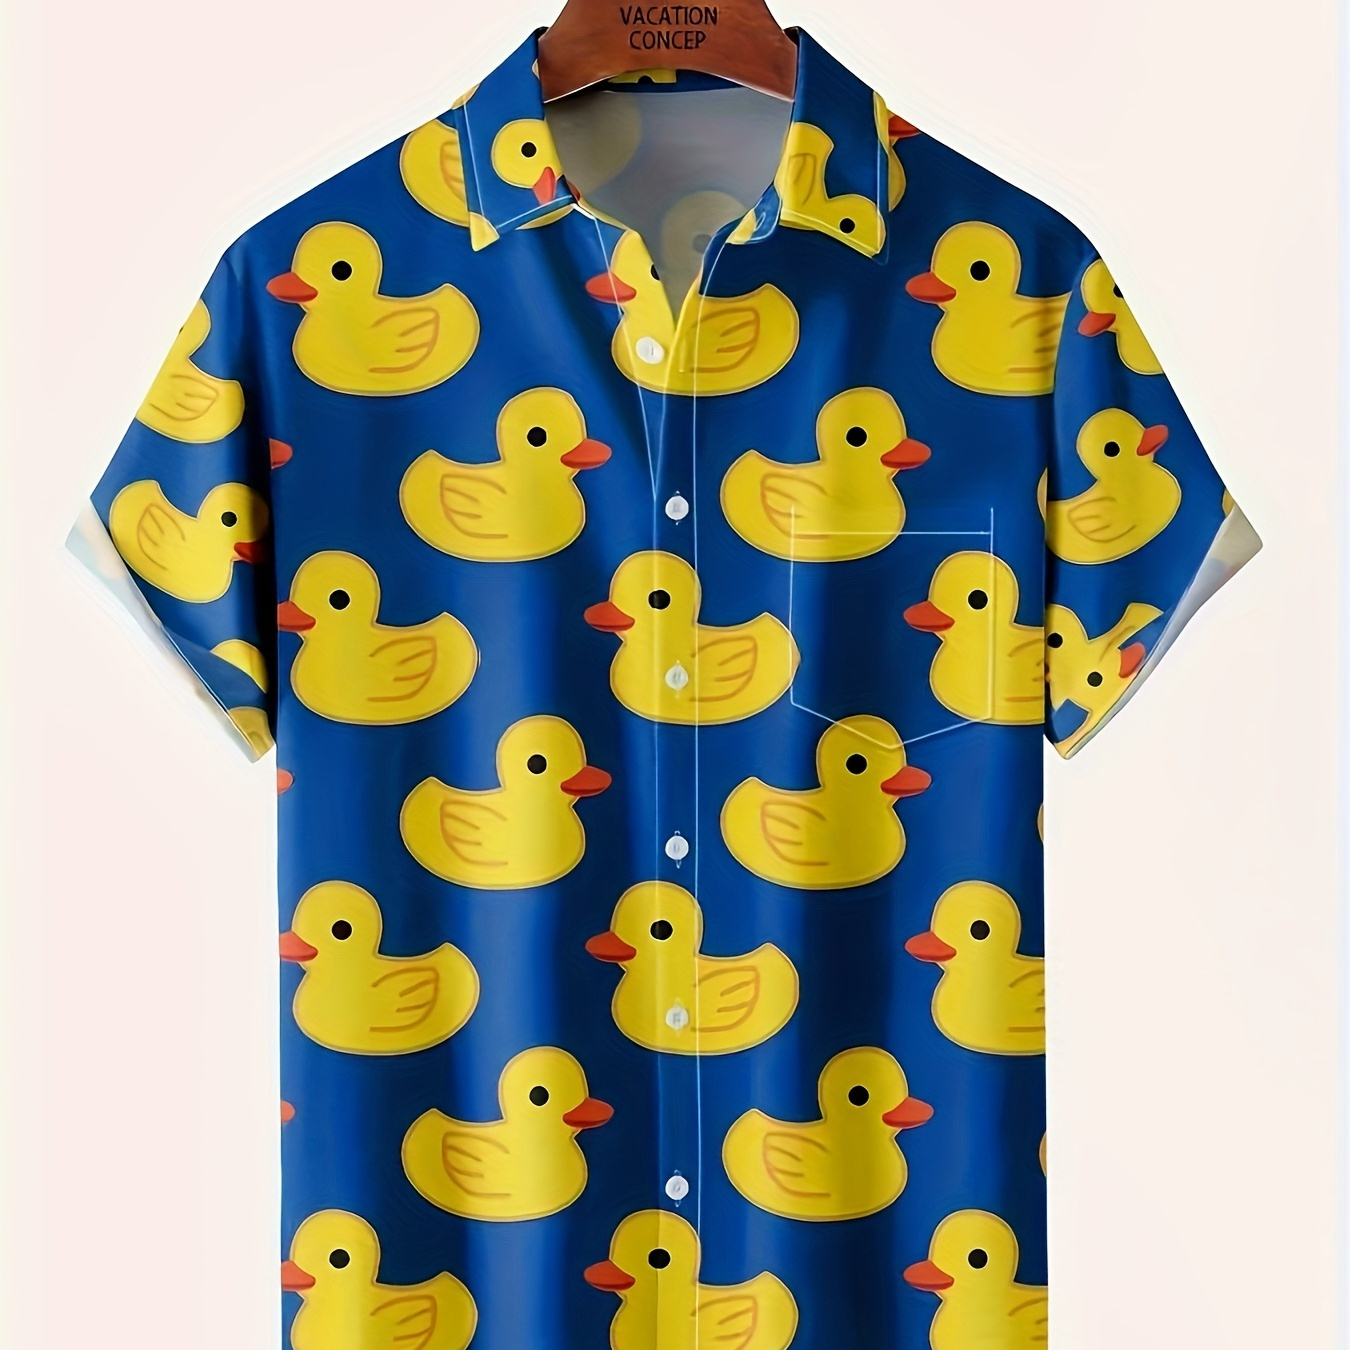 

Men's Trendy Hawaiian Lapel Collar Graphic Shirt With Stylish Casual Yellow Duck Print For Summer Vacation And Casual Wear, Summer Vacation Leisurewear